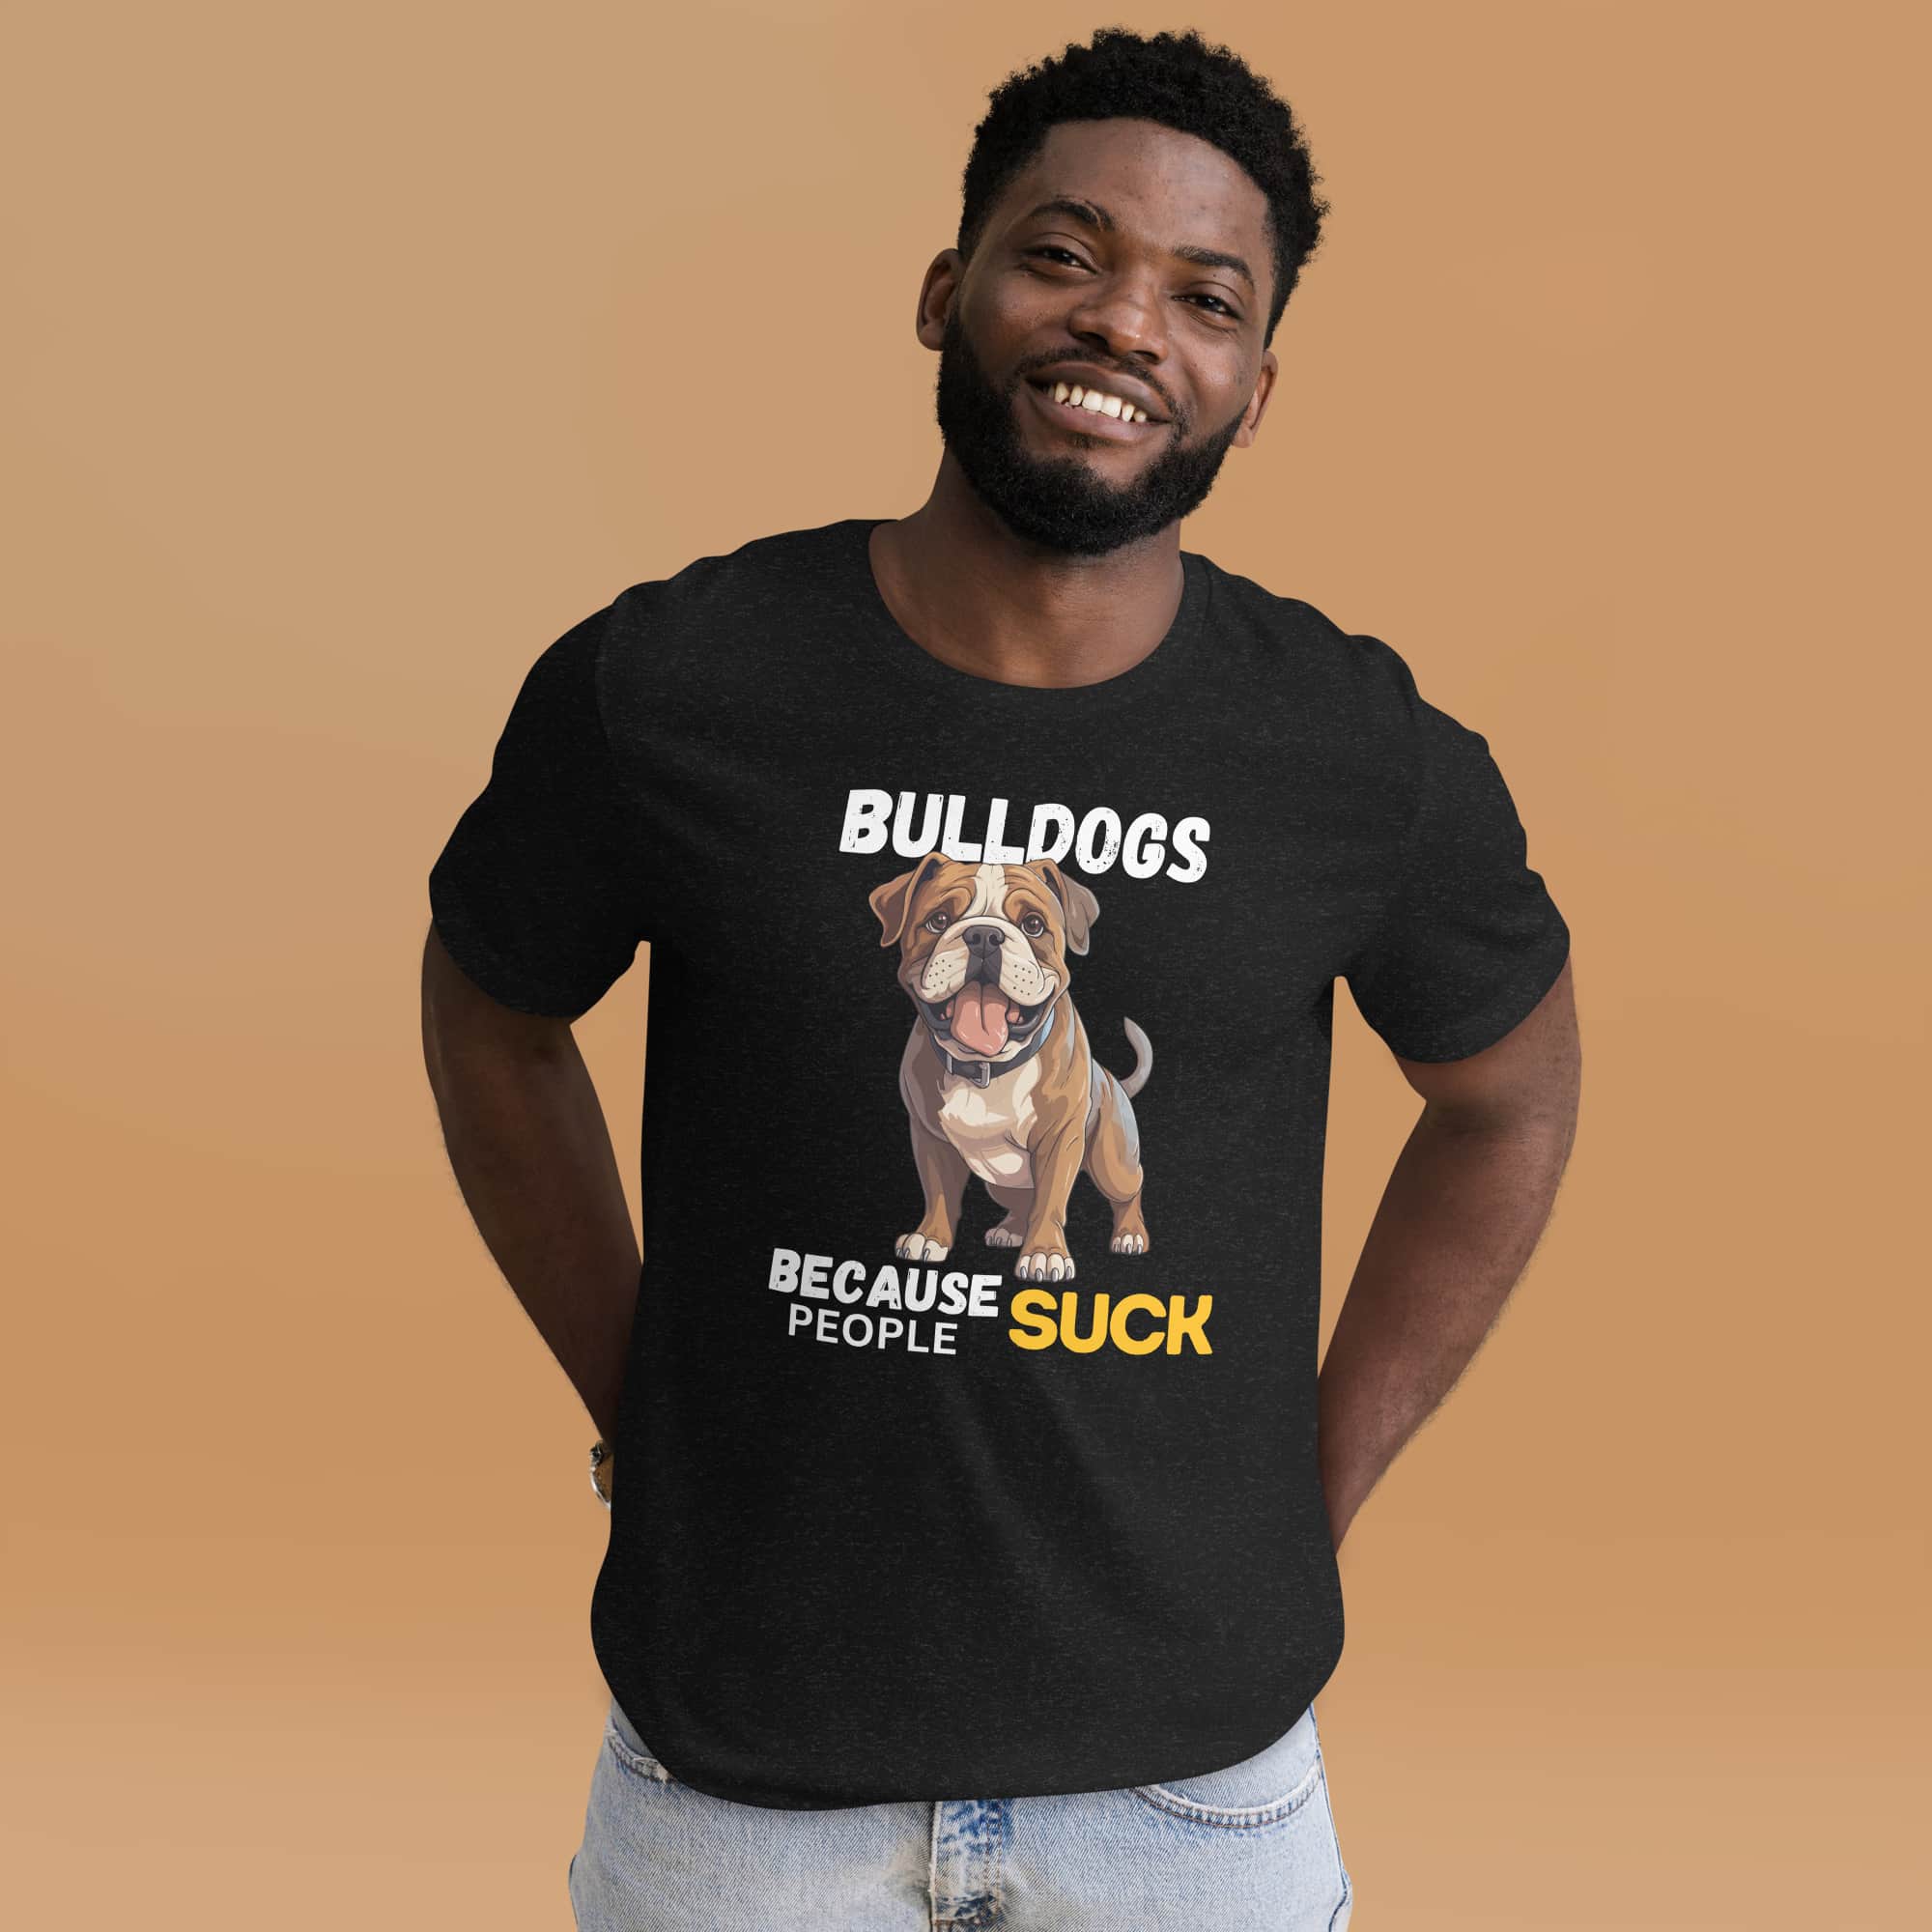 Bulldogs Because People Suck Unisex T-Shirt male t